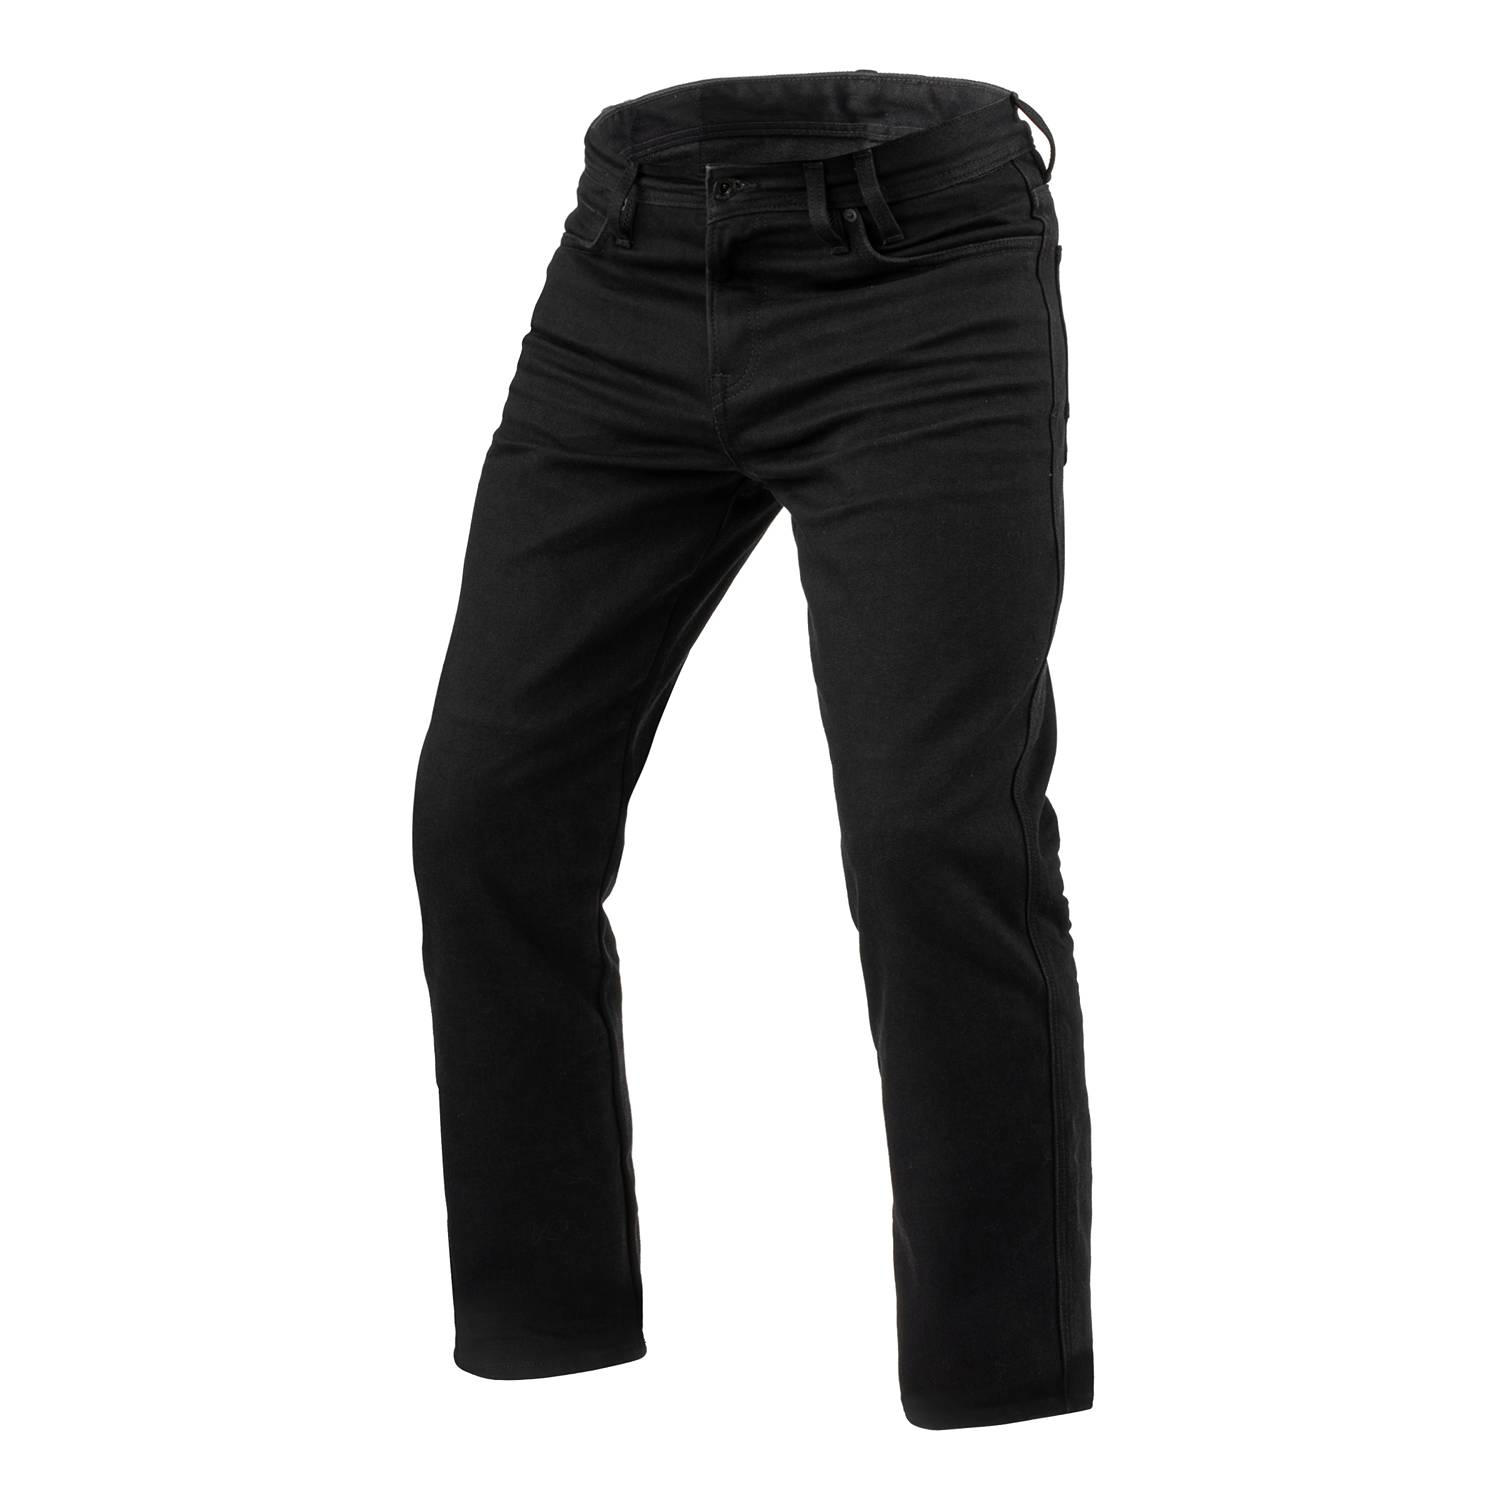 Image of REV'IT! Jeans Lombard 3 RF Black L34 Motorcycle Jeans Size L34/W31 ID 8700001375733